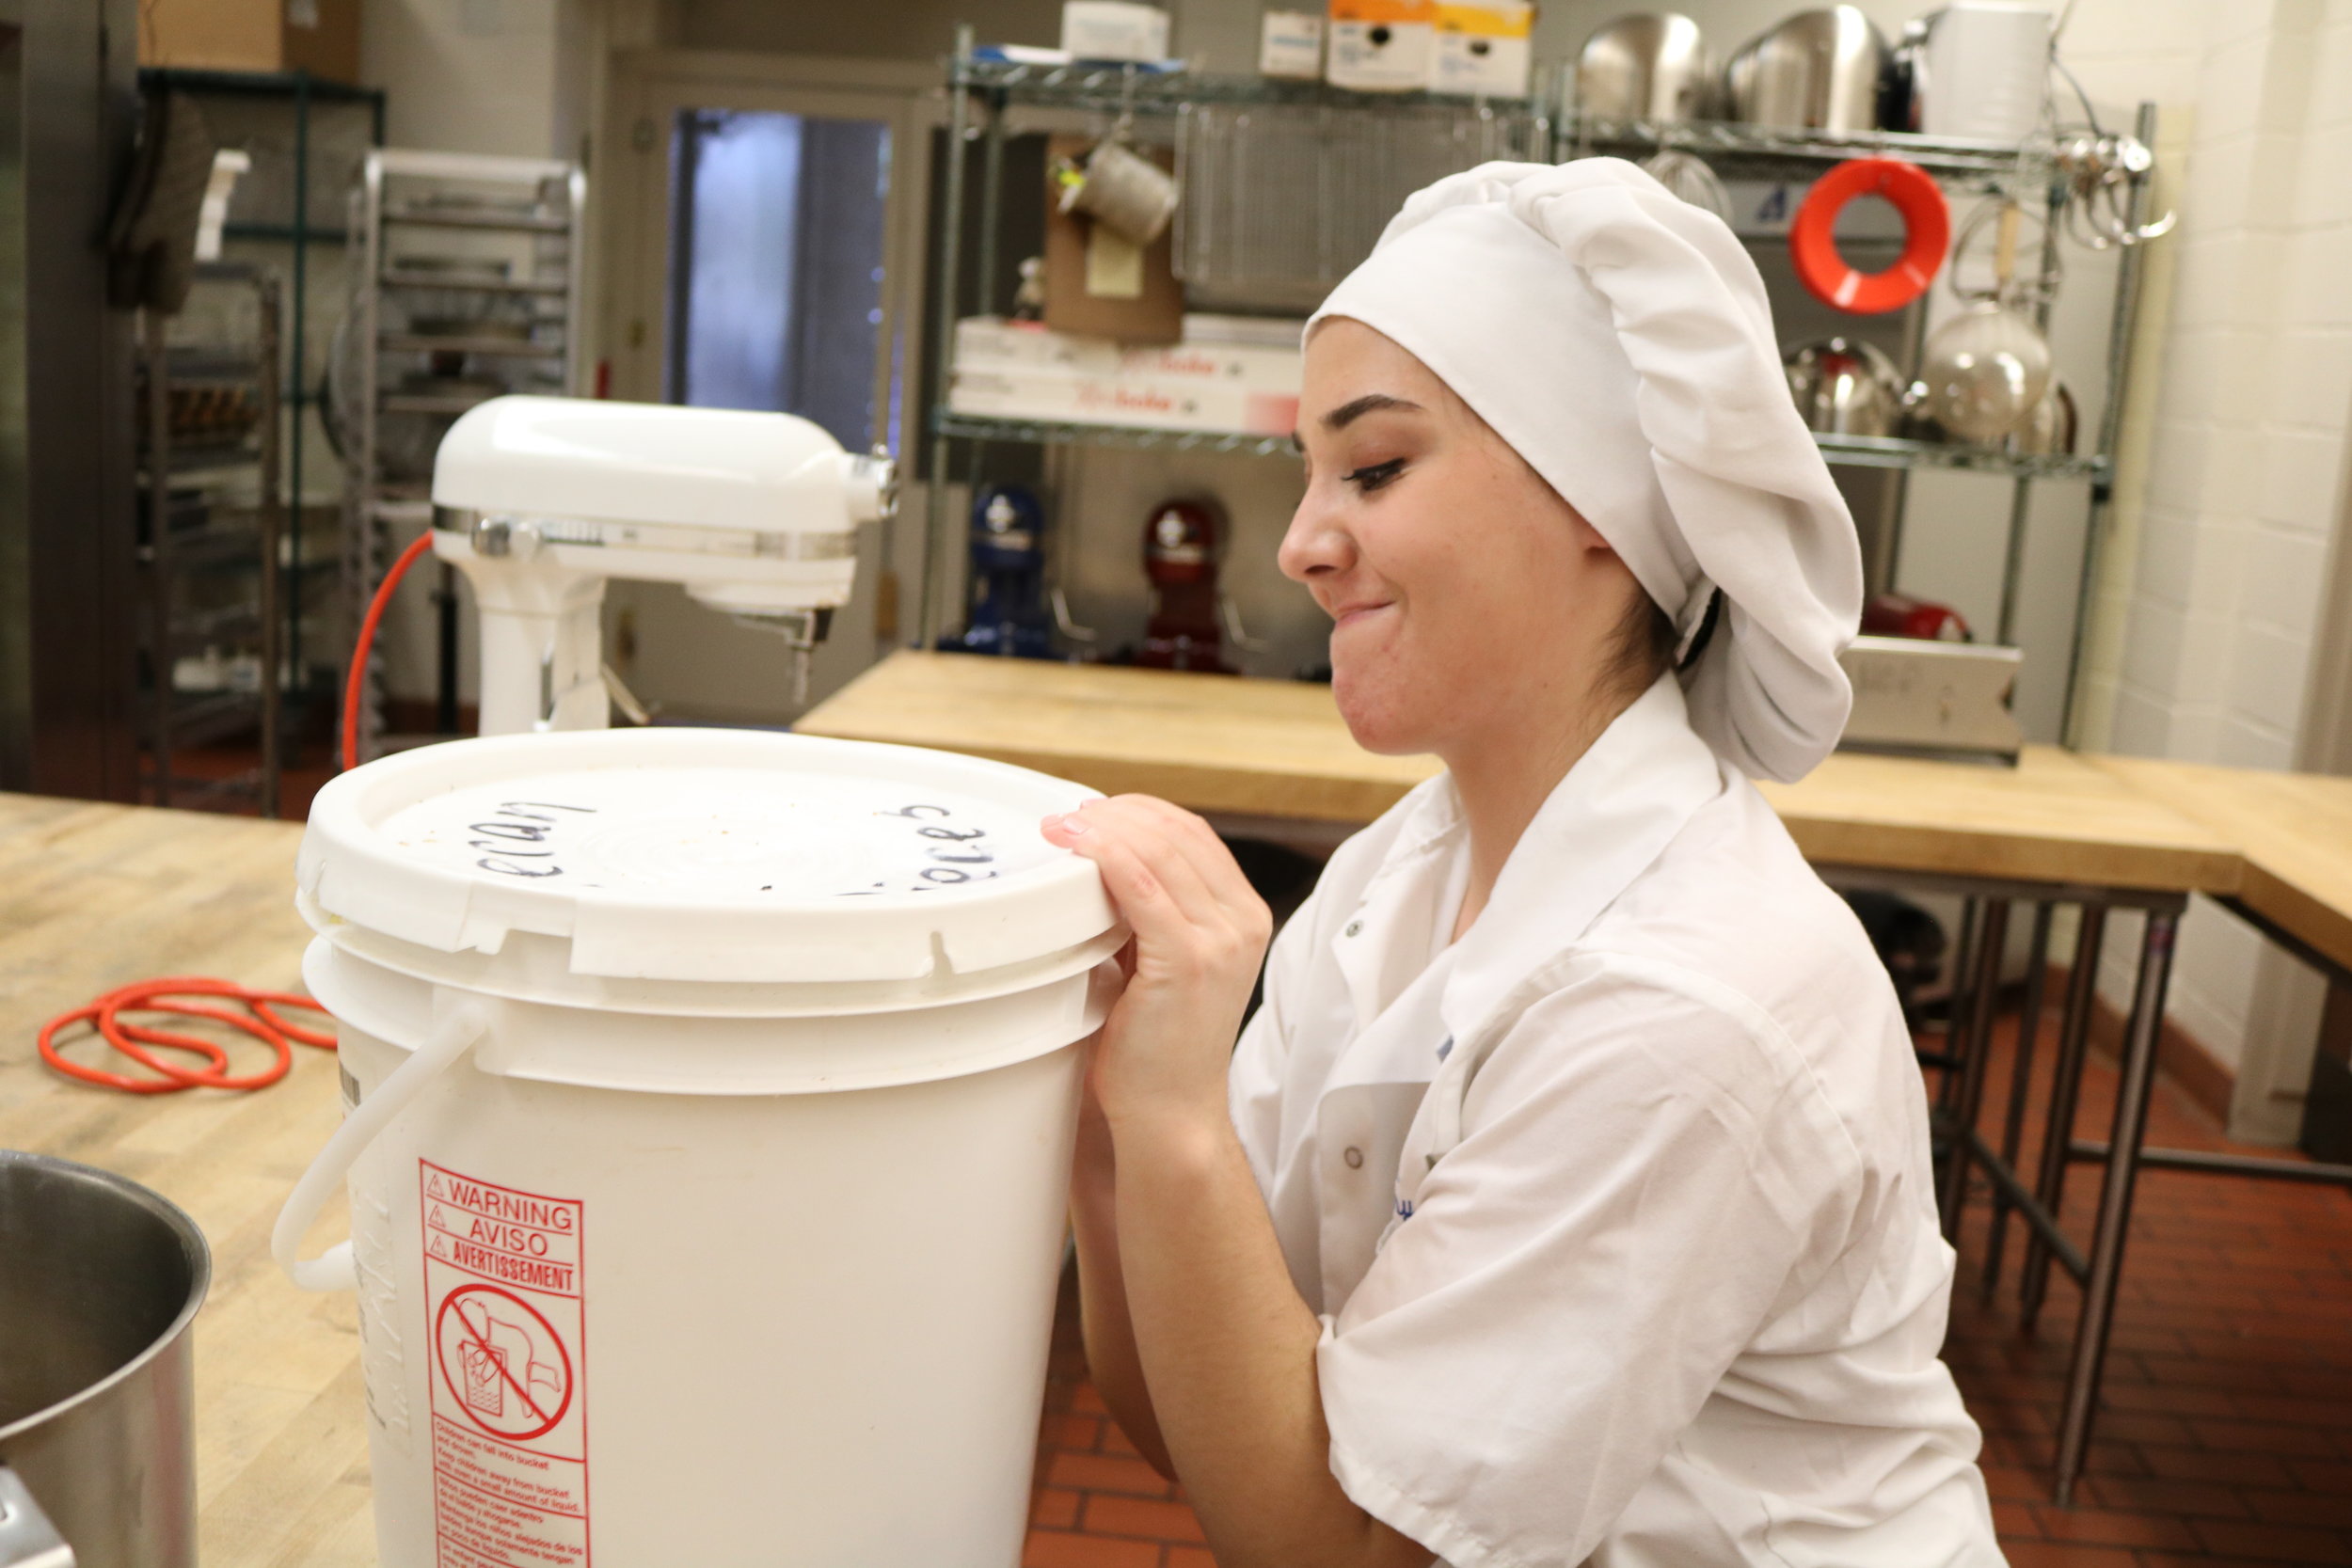   Ally Berrich, 17, works to open a tub of dough to bake for a commercial order in her baking and pastry course at the Center of Applied Technology North in Severn, Md., on May 5, 2016.  